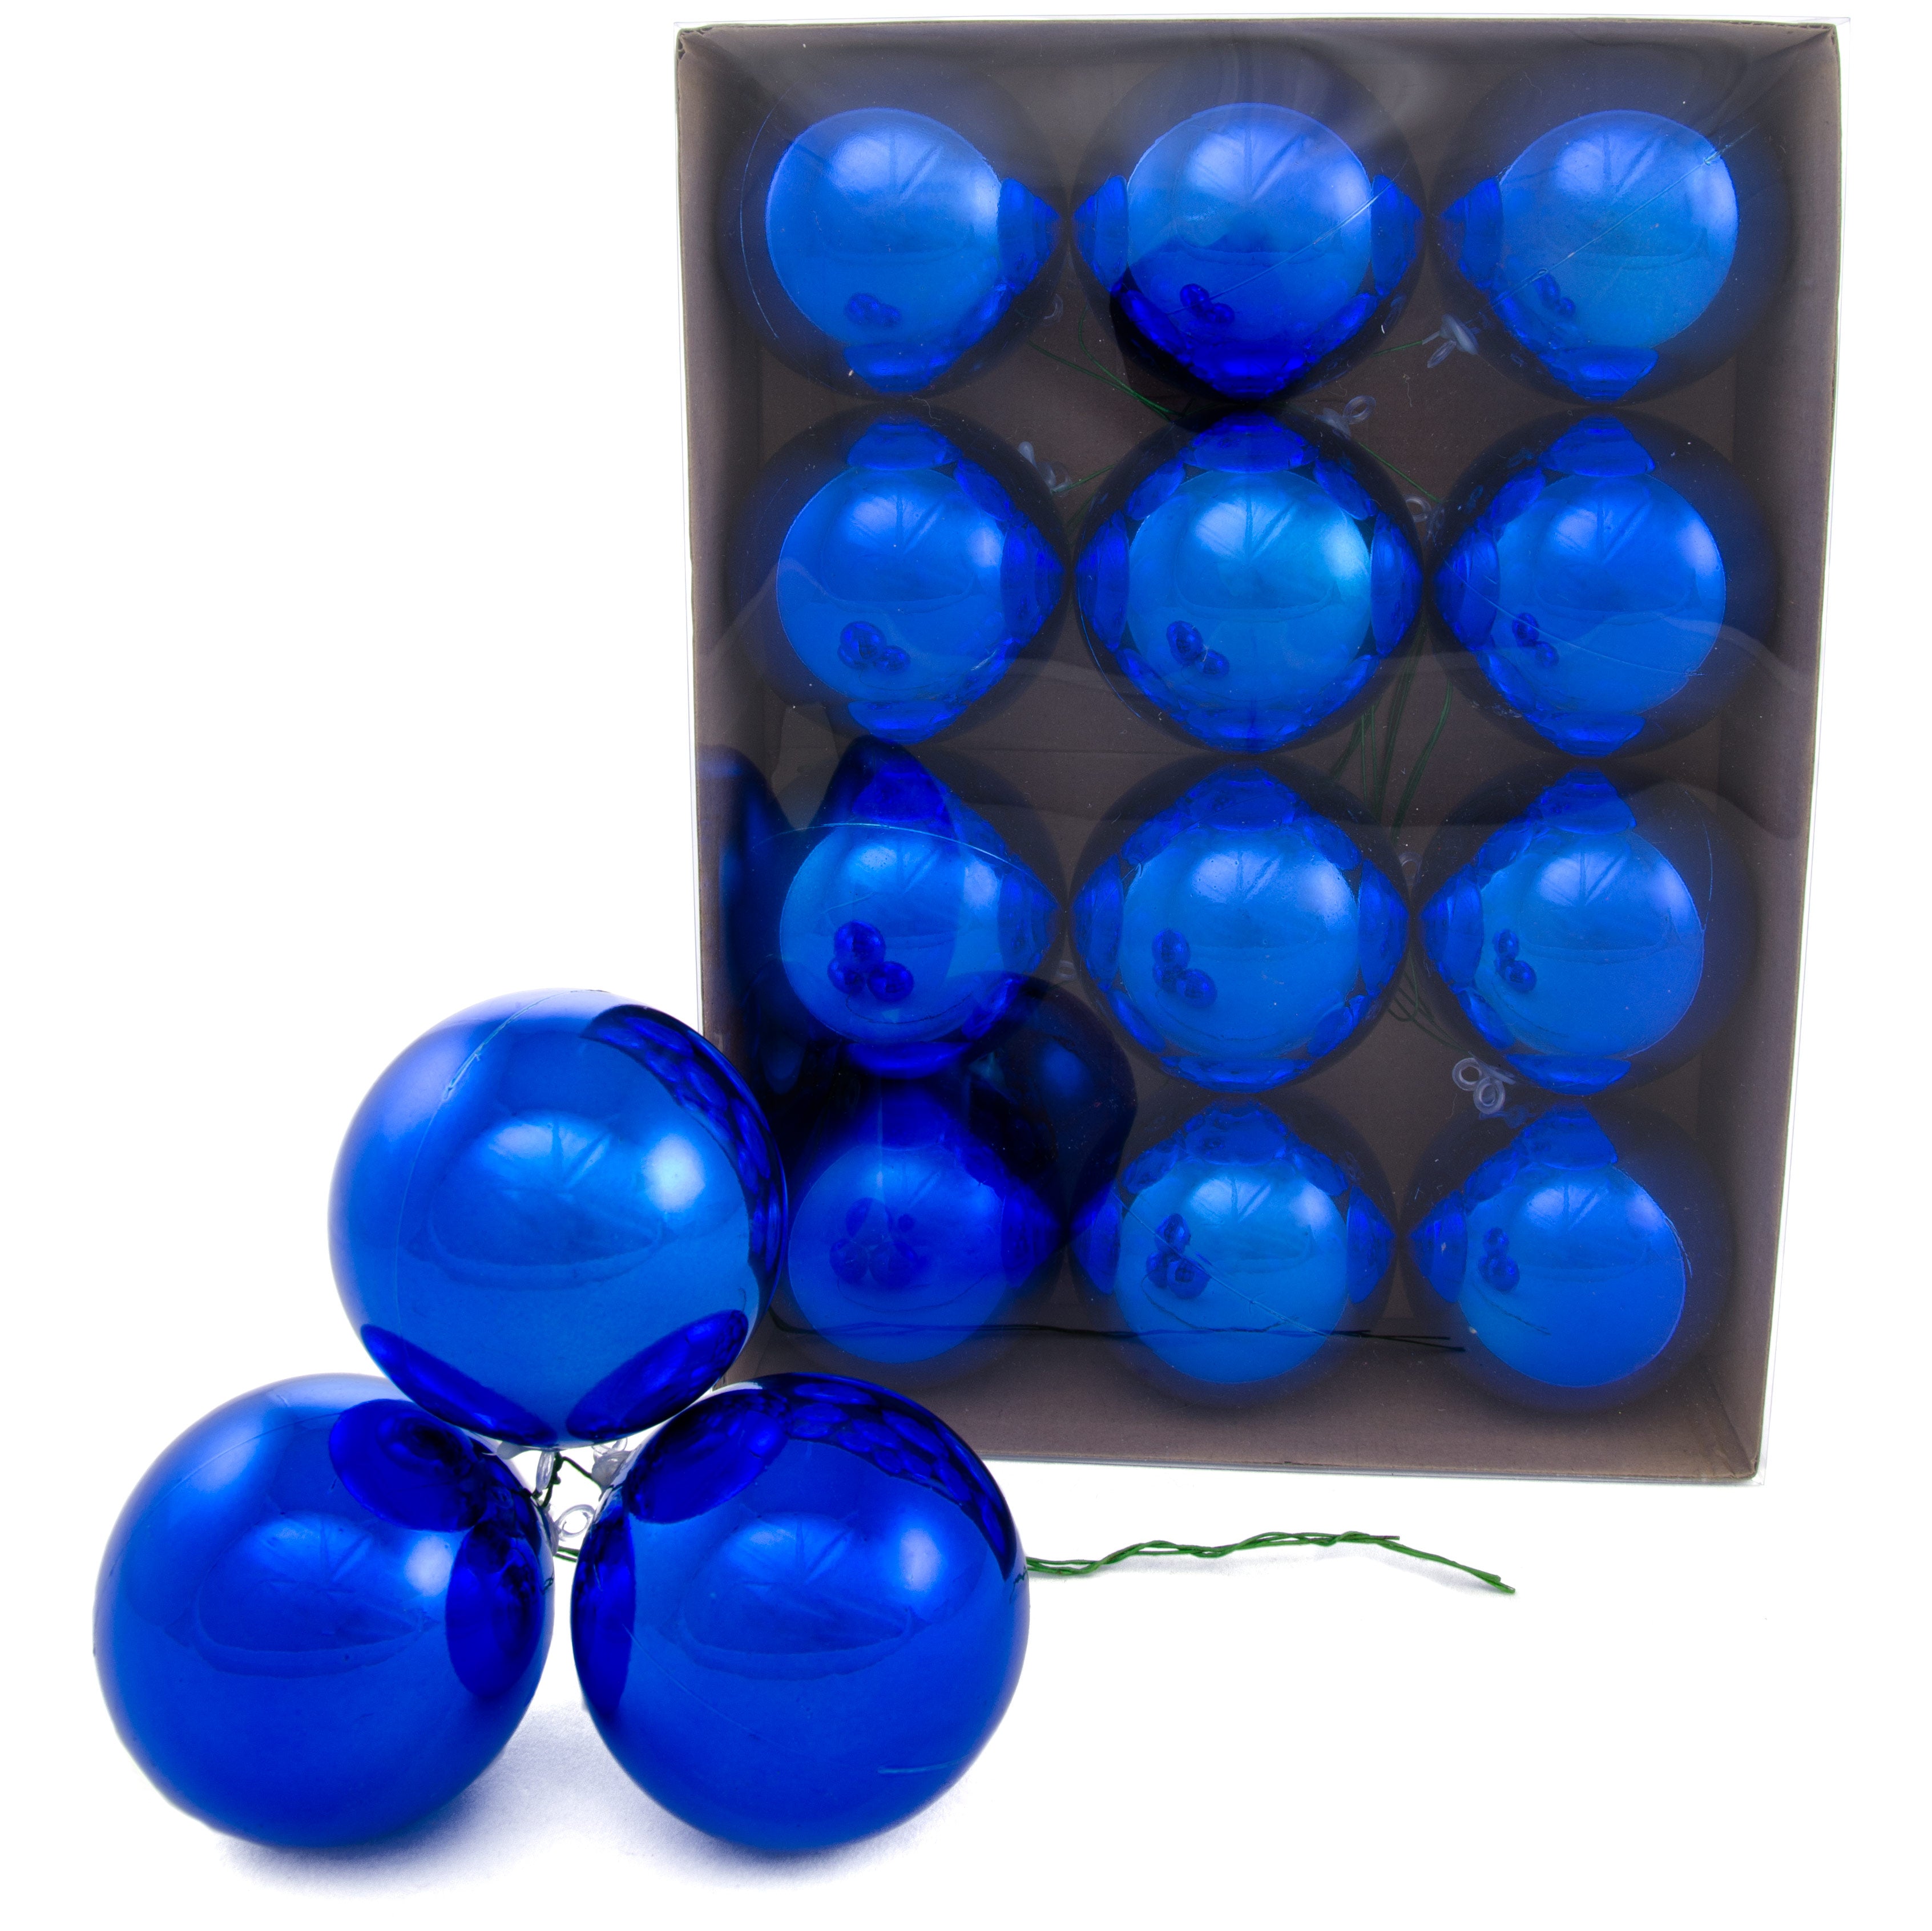 70MM Metallic Ball Ornament On Wire: Royal Blue (12)